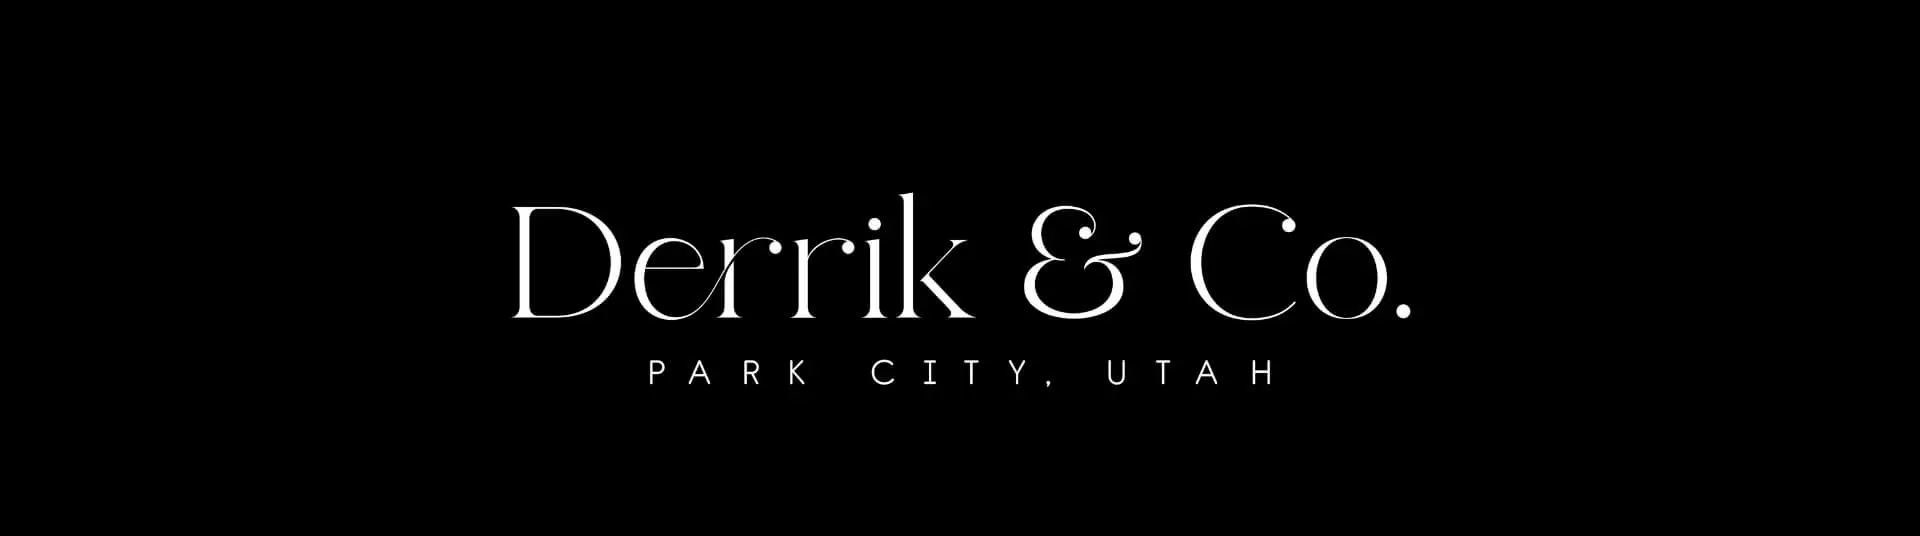 Top Park City Real Estate Team with Derrik Carlson, Holly Carlson, Grayson West, and Richard Vunder